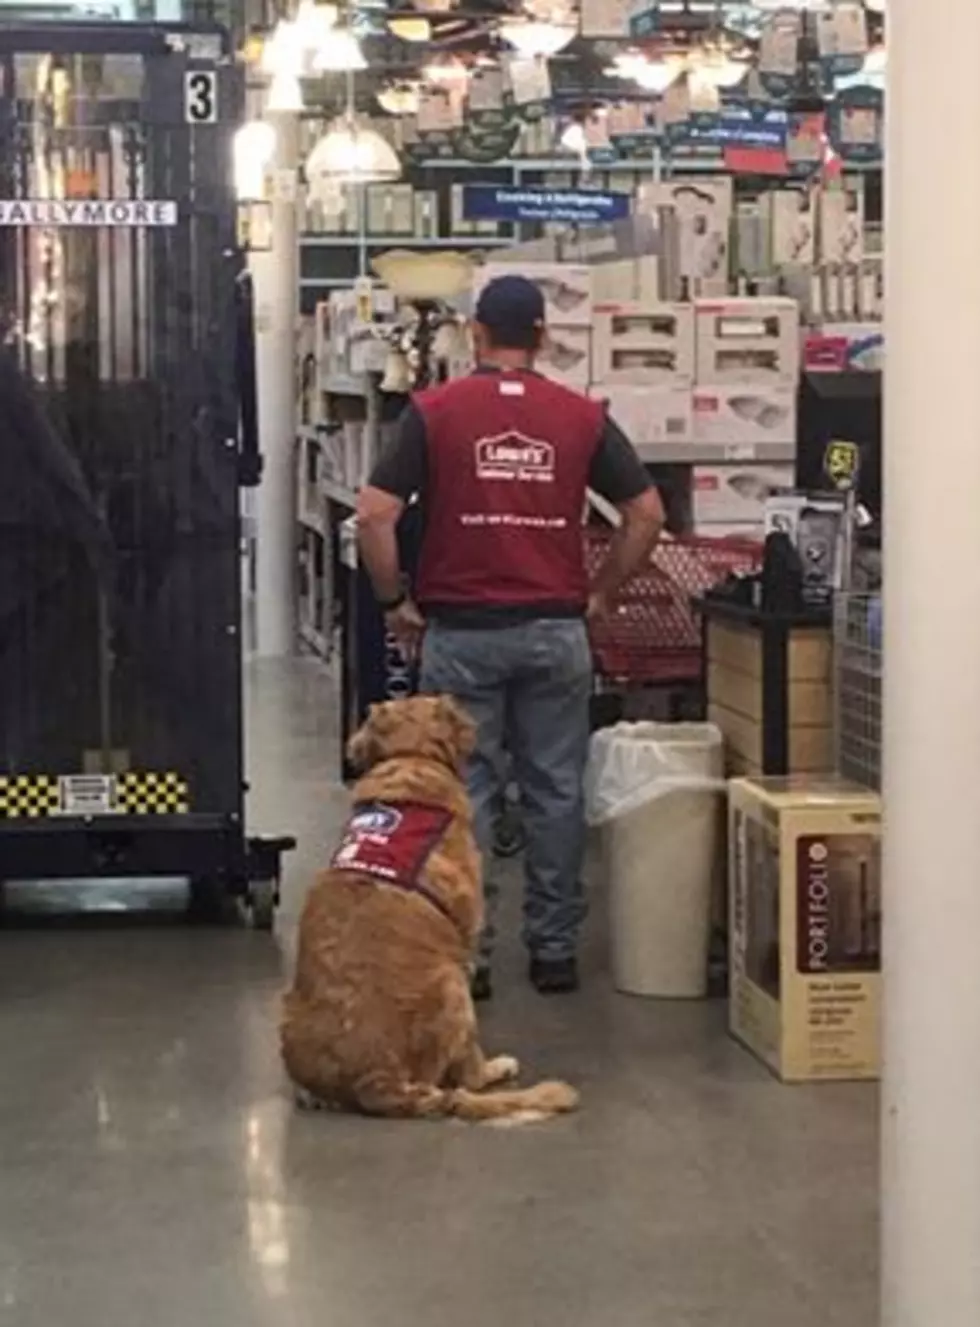 Texas Lowes Hires Disabled Vet and His Service Dog